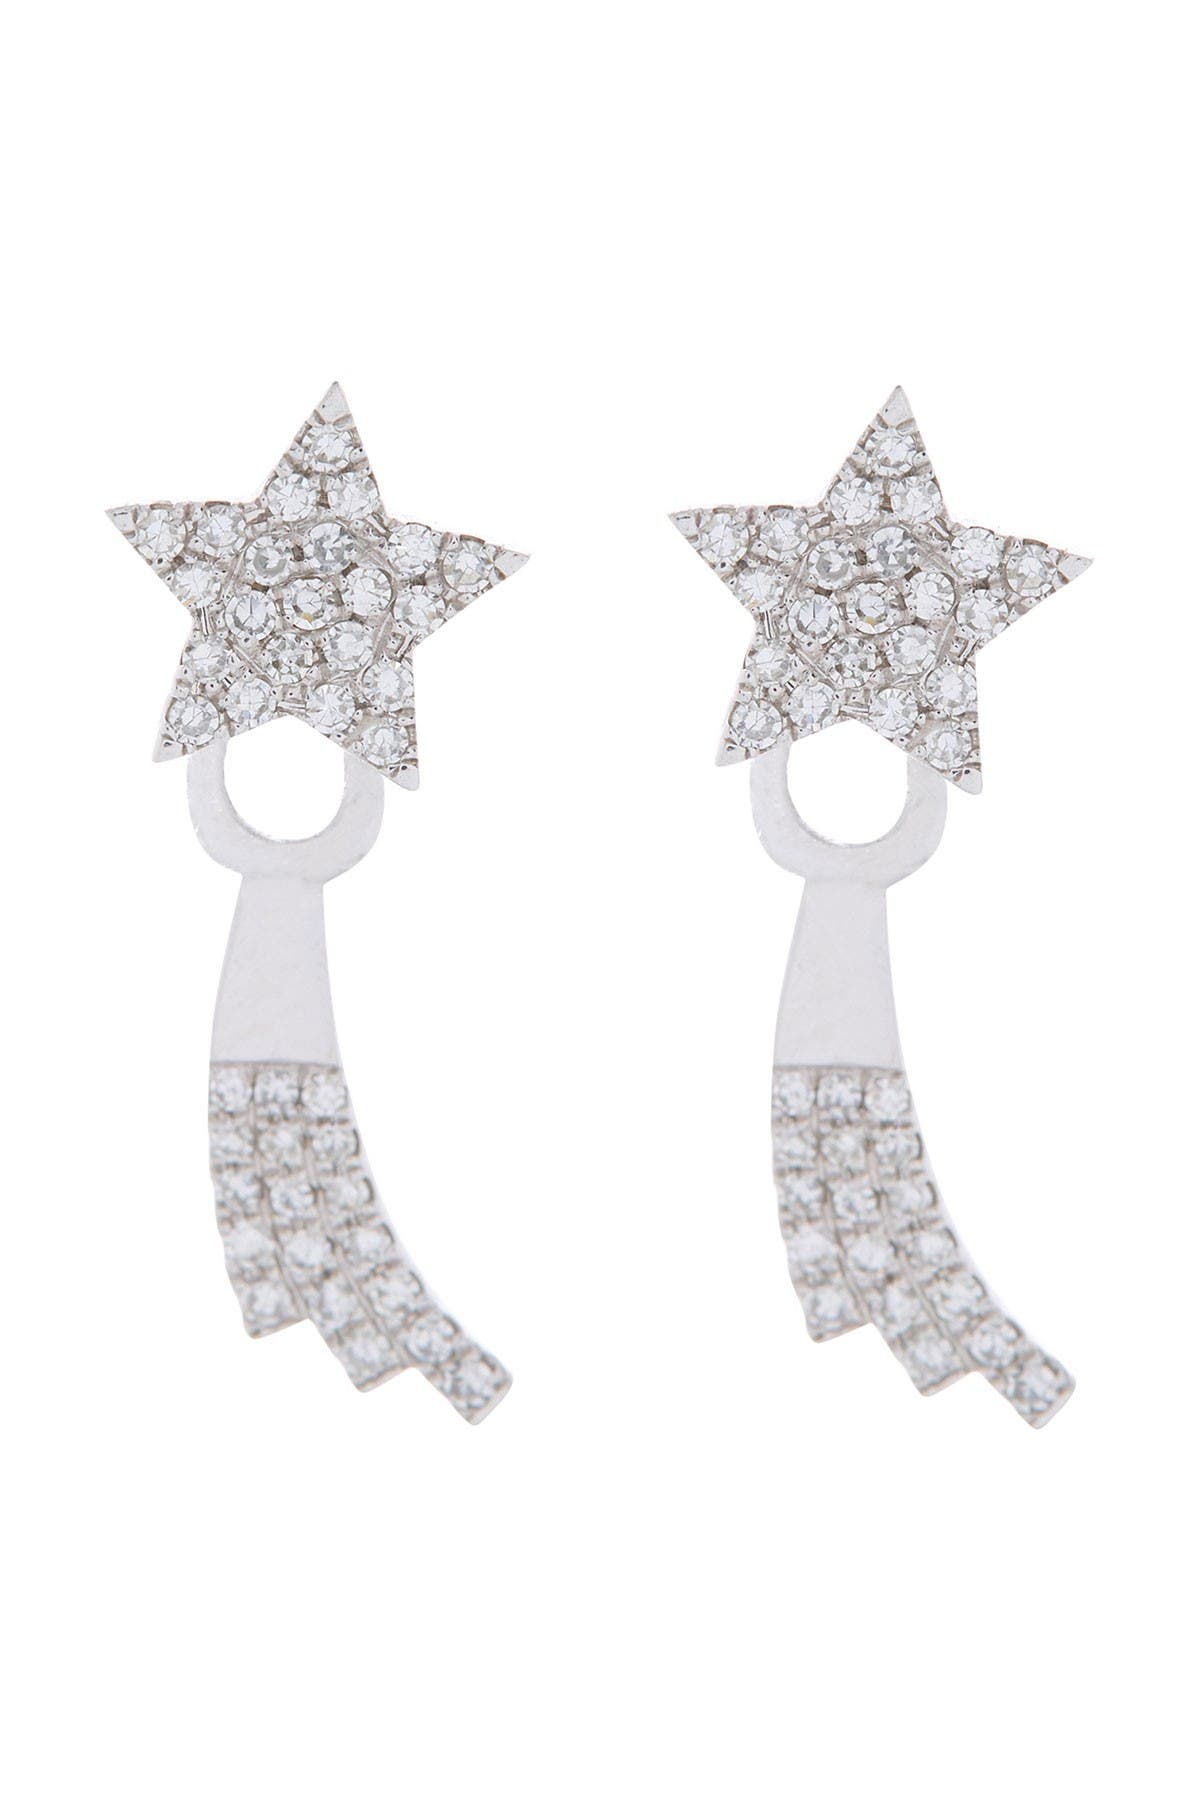 Ef Collection Earrings 14K WHITE GOLD PAVE DIAMOND SHOOTING STAR SINGLE RIGHT JACKET EARRING